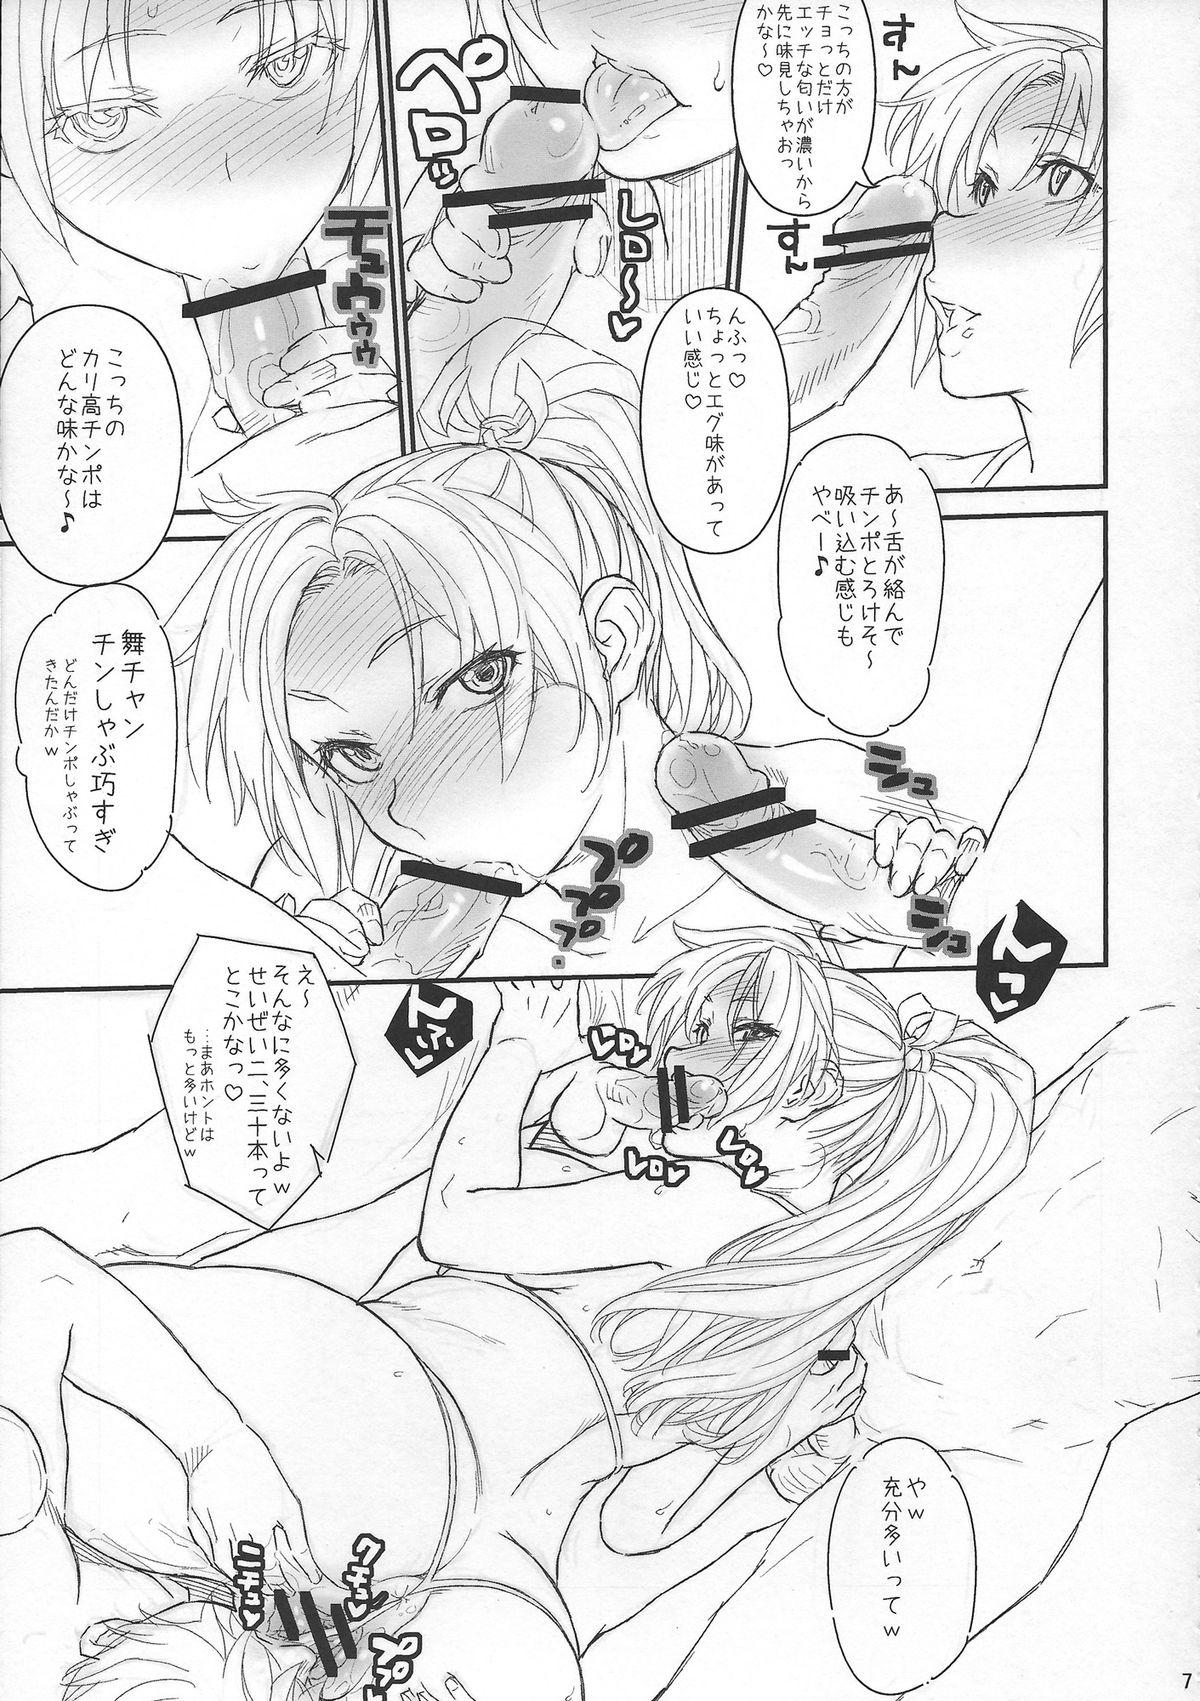 Gayclips Mai-chan to Nobetsumakunashi - King of fighters Seduction - Page 6